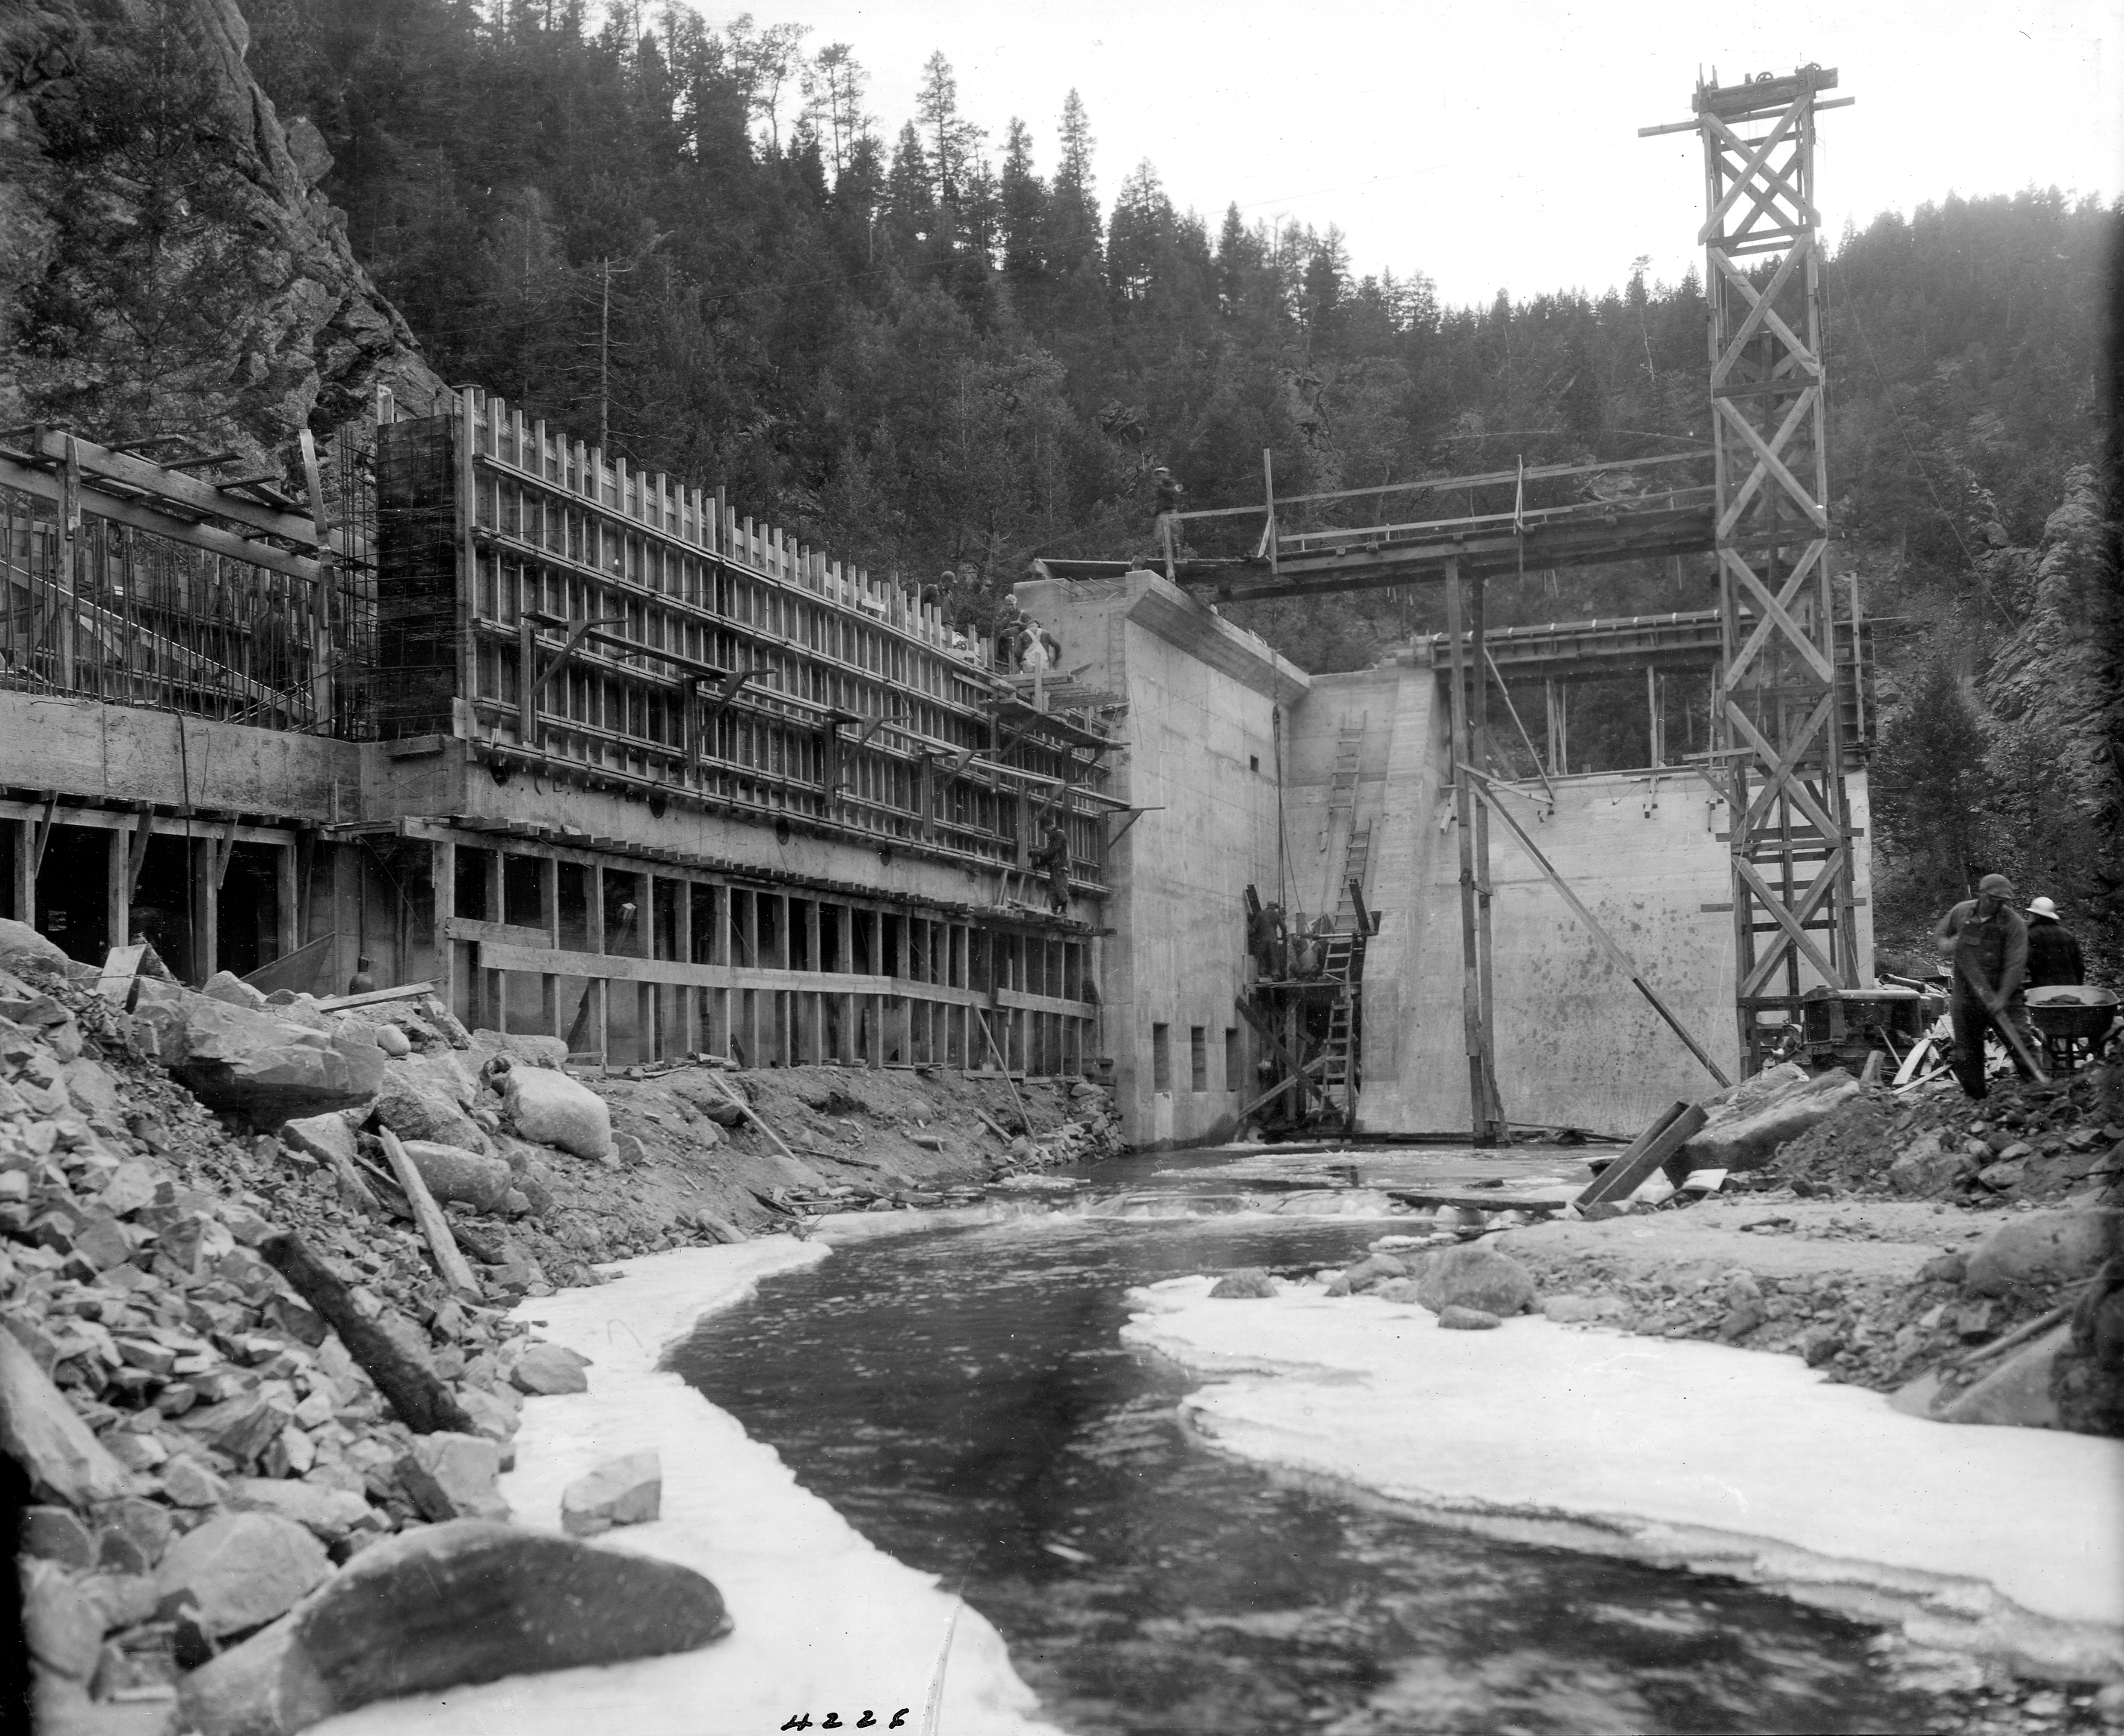 The South Boulder Creek Diversion Dam under construction in the 1930s.